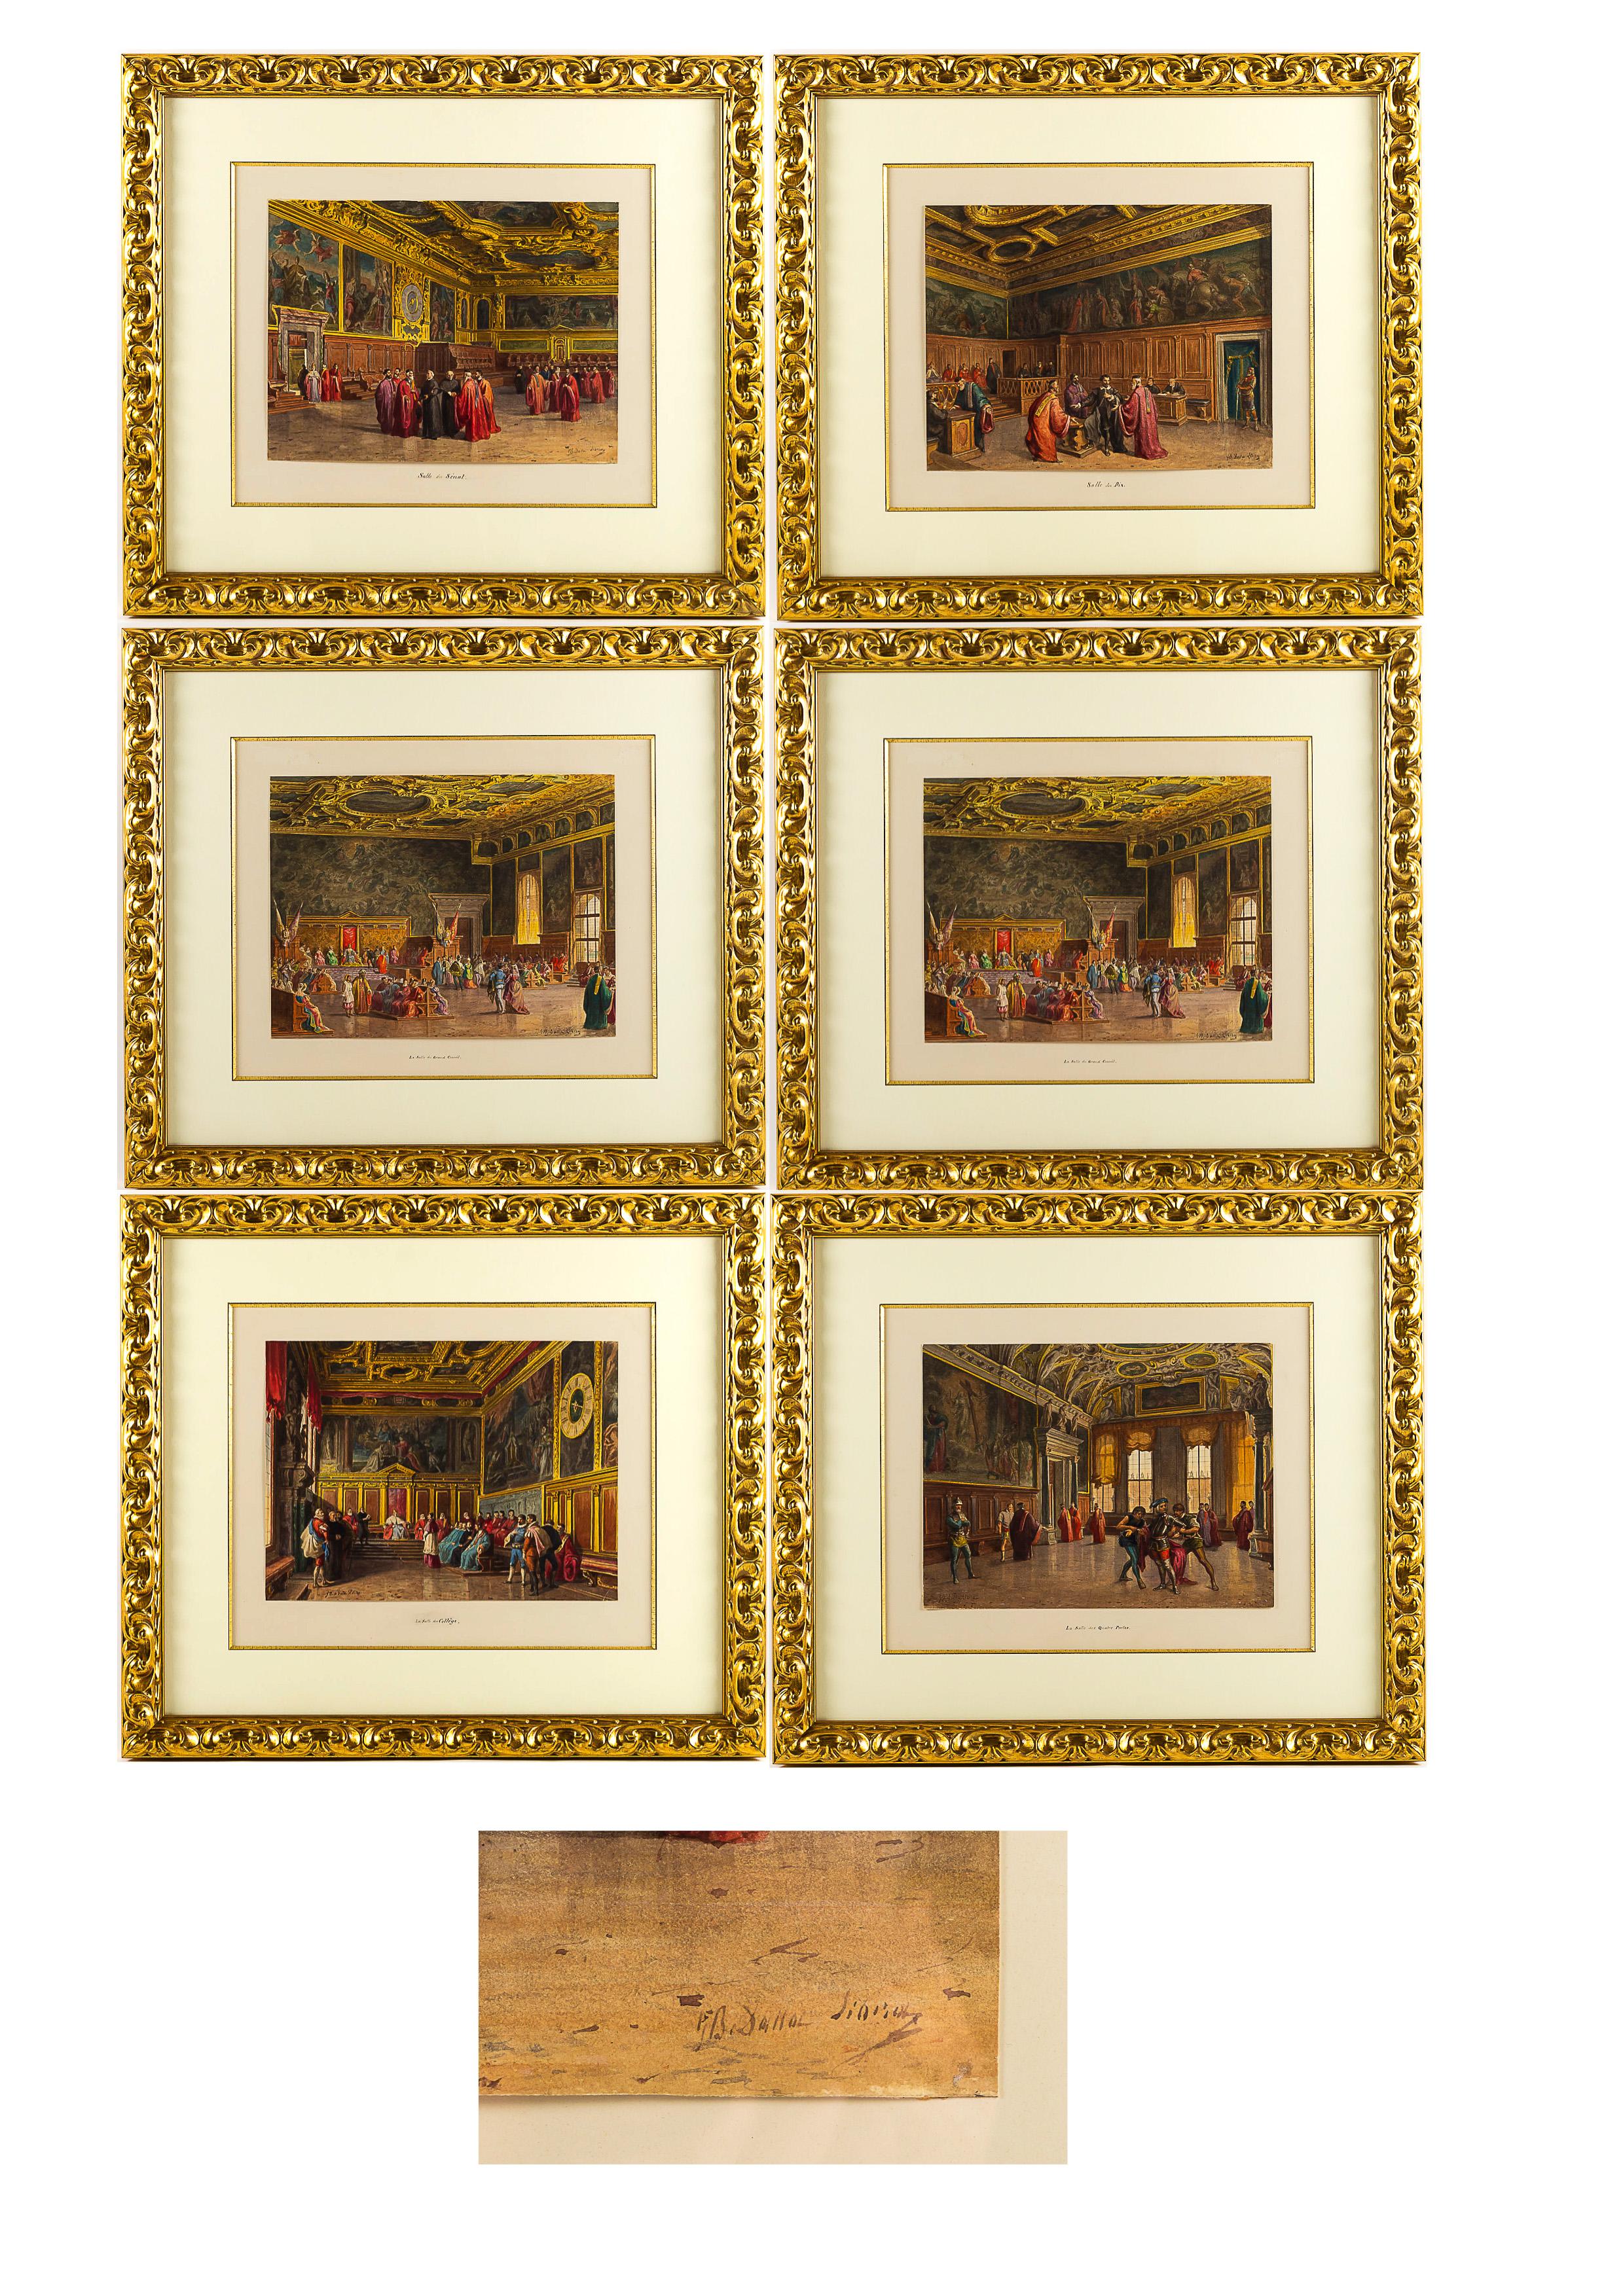 Giovanni Battista Della Libera Rare set of six watercolor views of Doge’s Palace in Venice, circa 1850

A unique and gorgeous set of six watercolor views of Doge’s Palace one Venice depicting:
The Four Doors.
Antechamber to the Hall of the Full